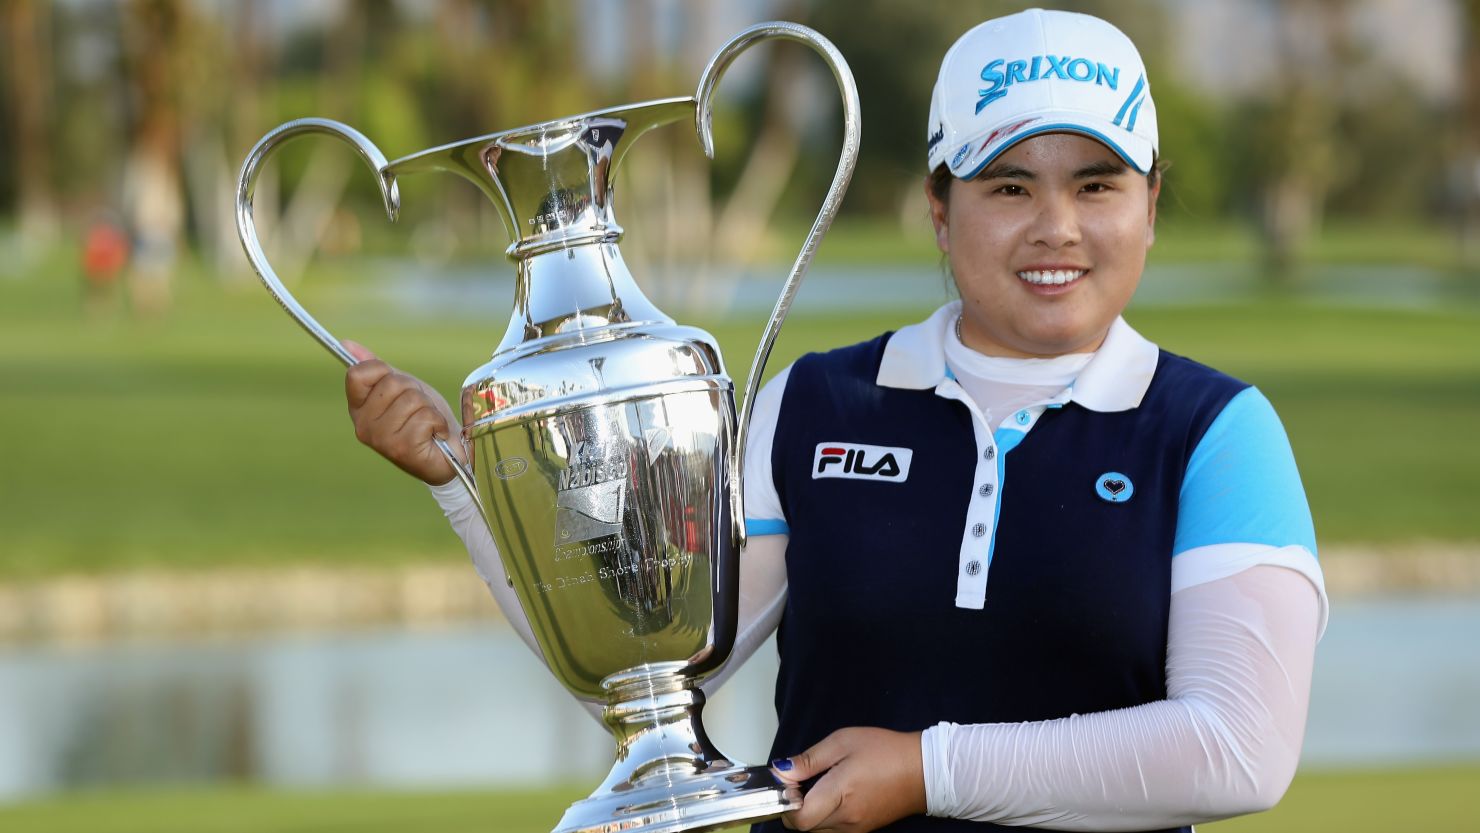 South Korea's Inbee Park won the second major of her career at the Kraft Nabisco Championship.